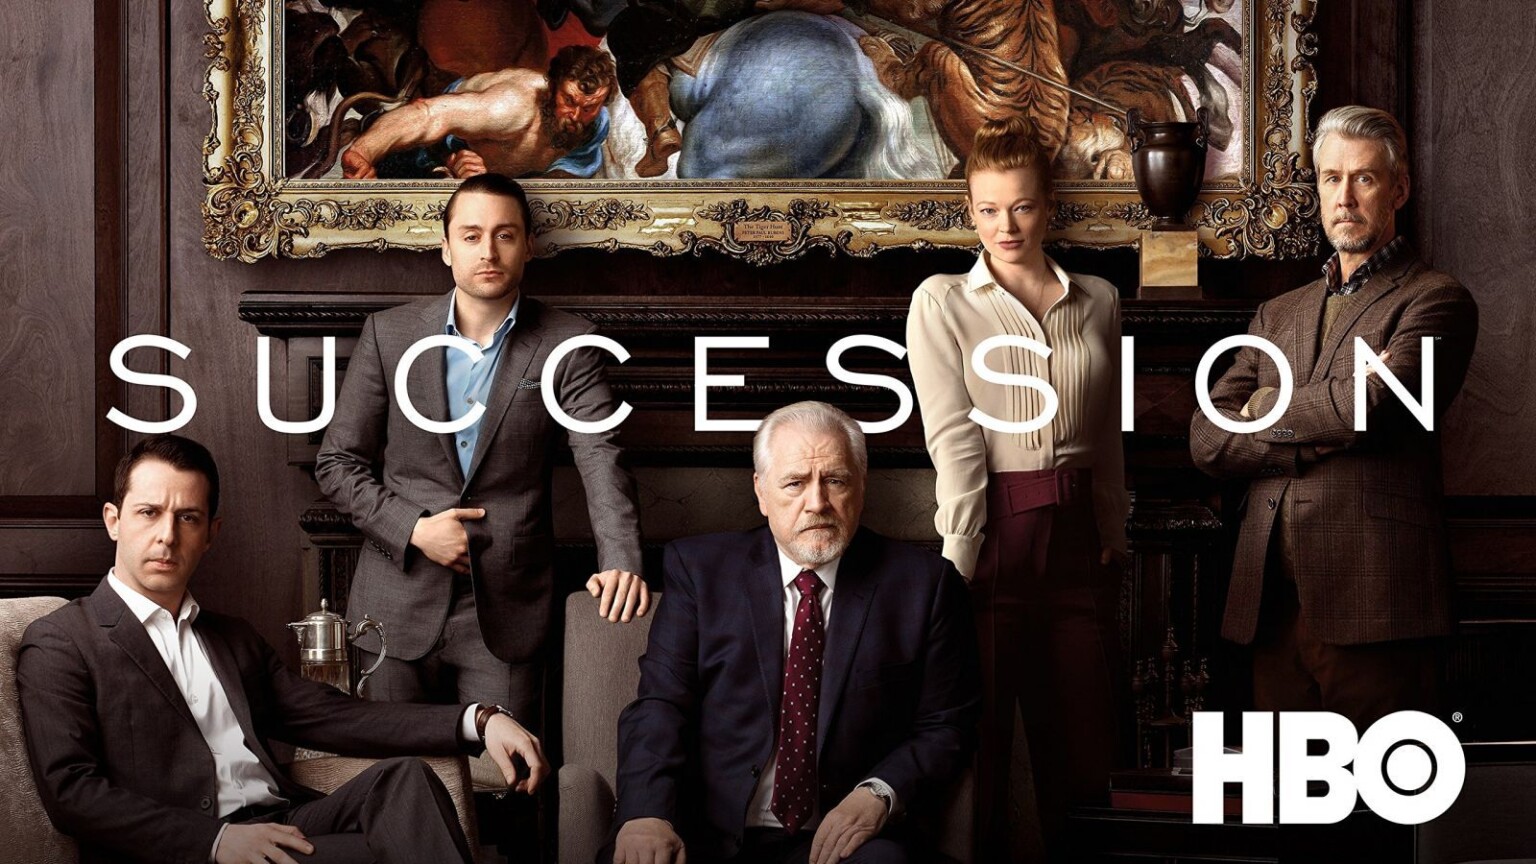 How to Watch 'Succession' Online - Live Stream Season 2